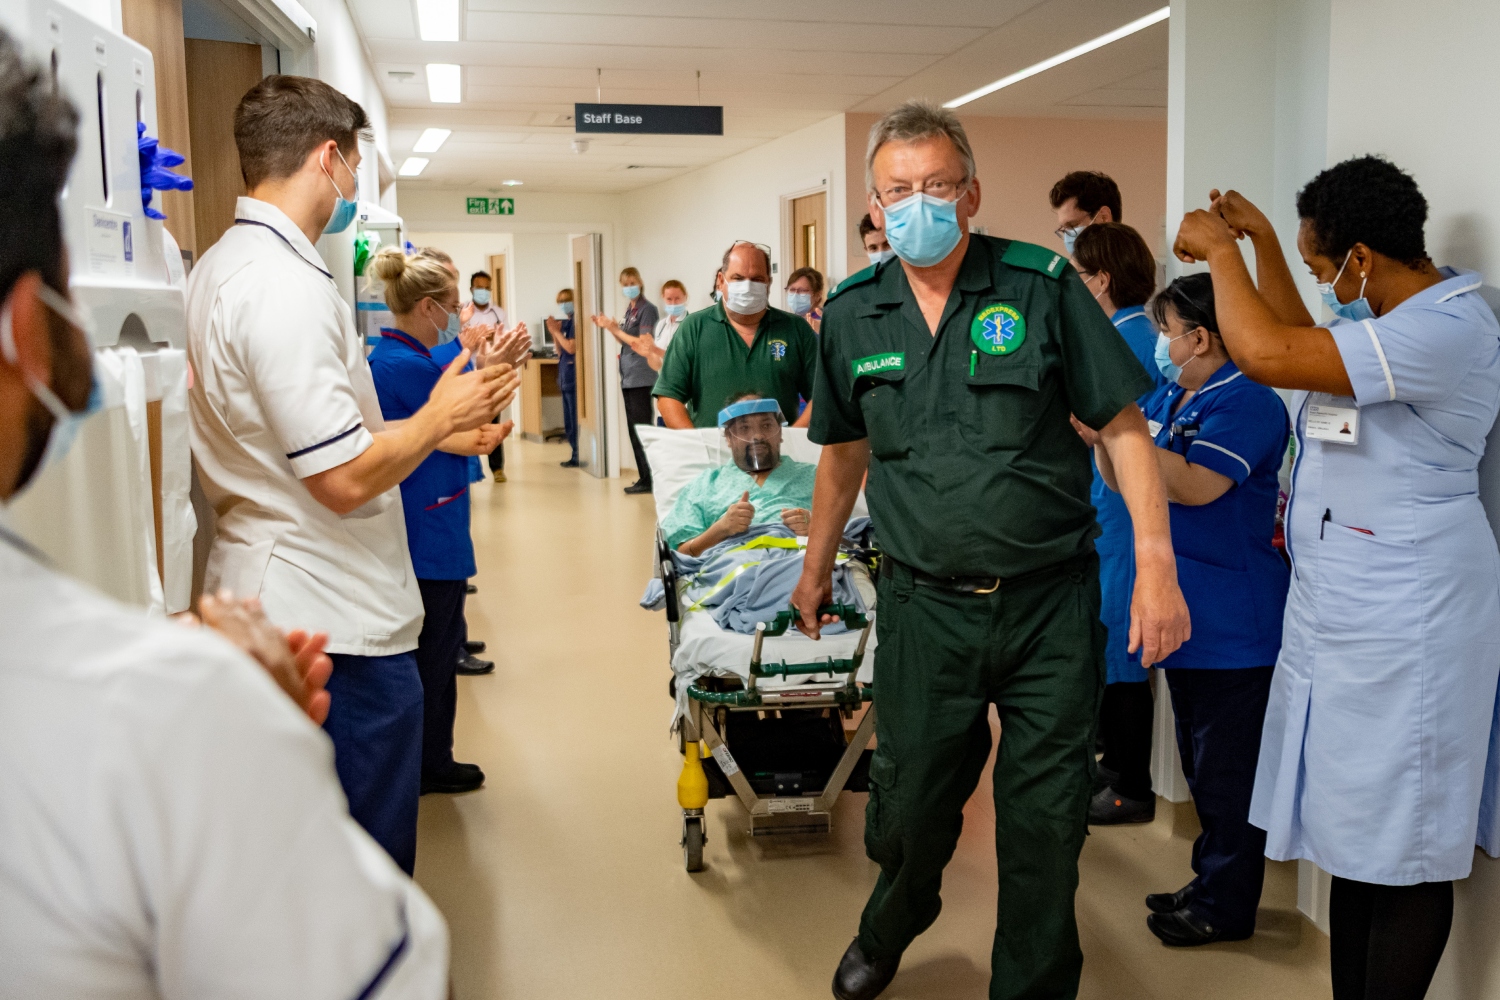 A patient is wheeled down a corridor, with hospital staff clapping either side of the corridor.